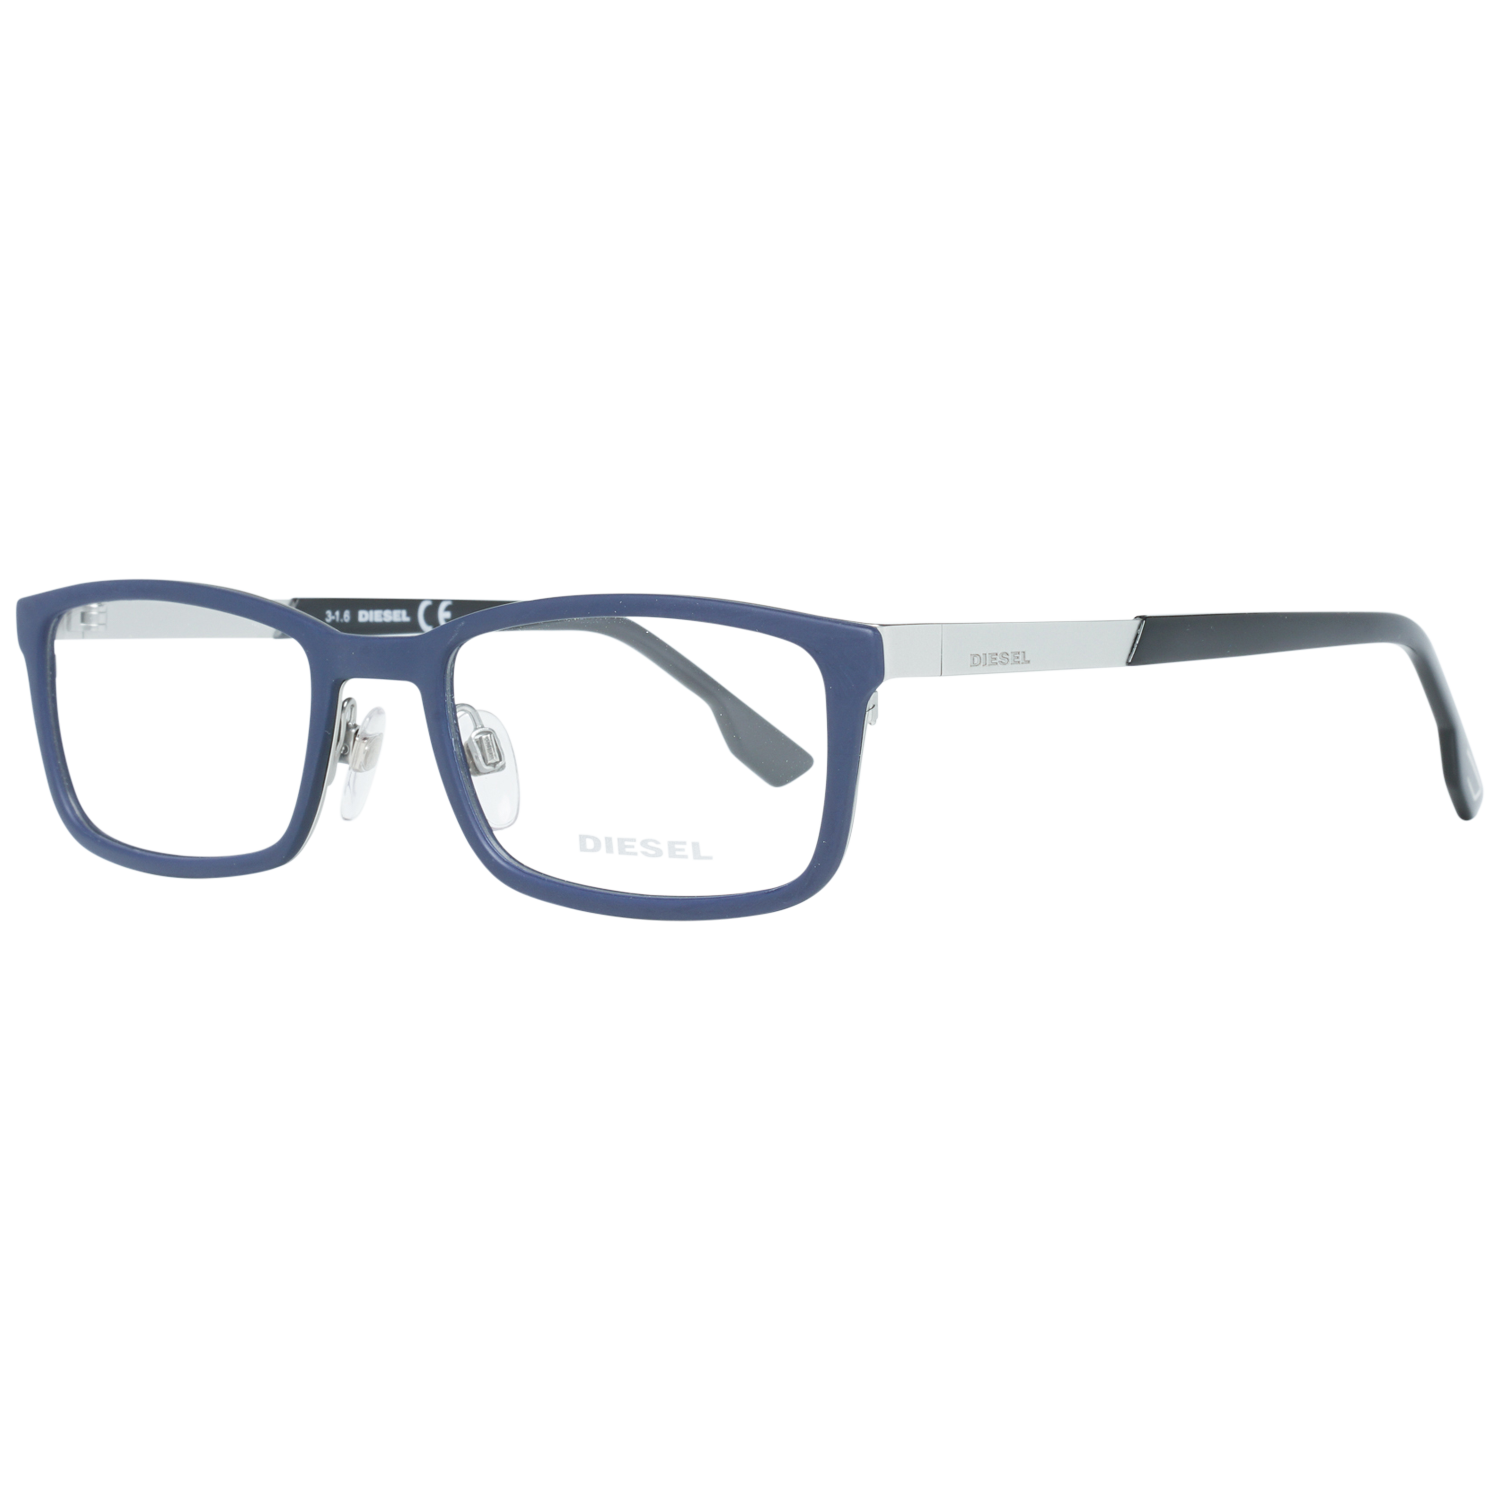 GenderMenMain colorBlueFrame colorBlueFrame materialPlasticSize54-20-145Lenses width54mmLenses heigth31mmBridge length20mmFrame width140mmTemple length145mmShipment includesCase, Cleaning clothStyleFull-RimSpring hingeNo